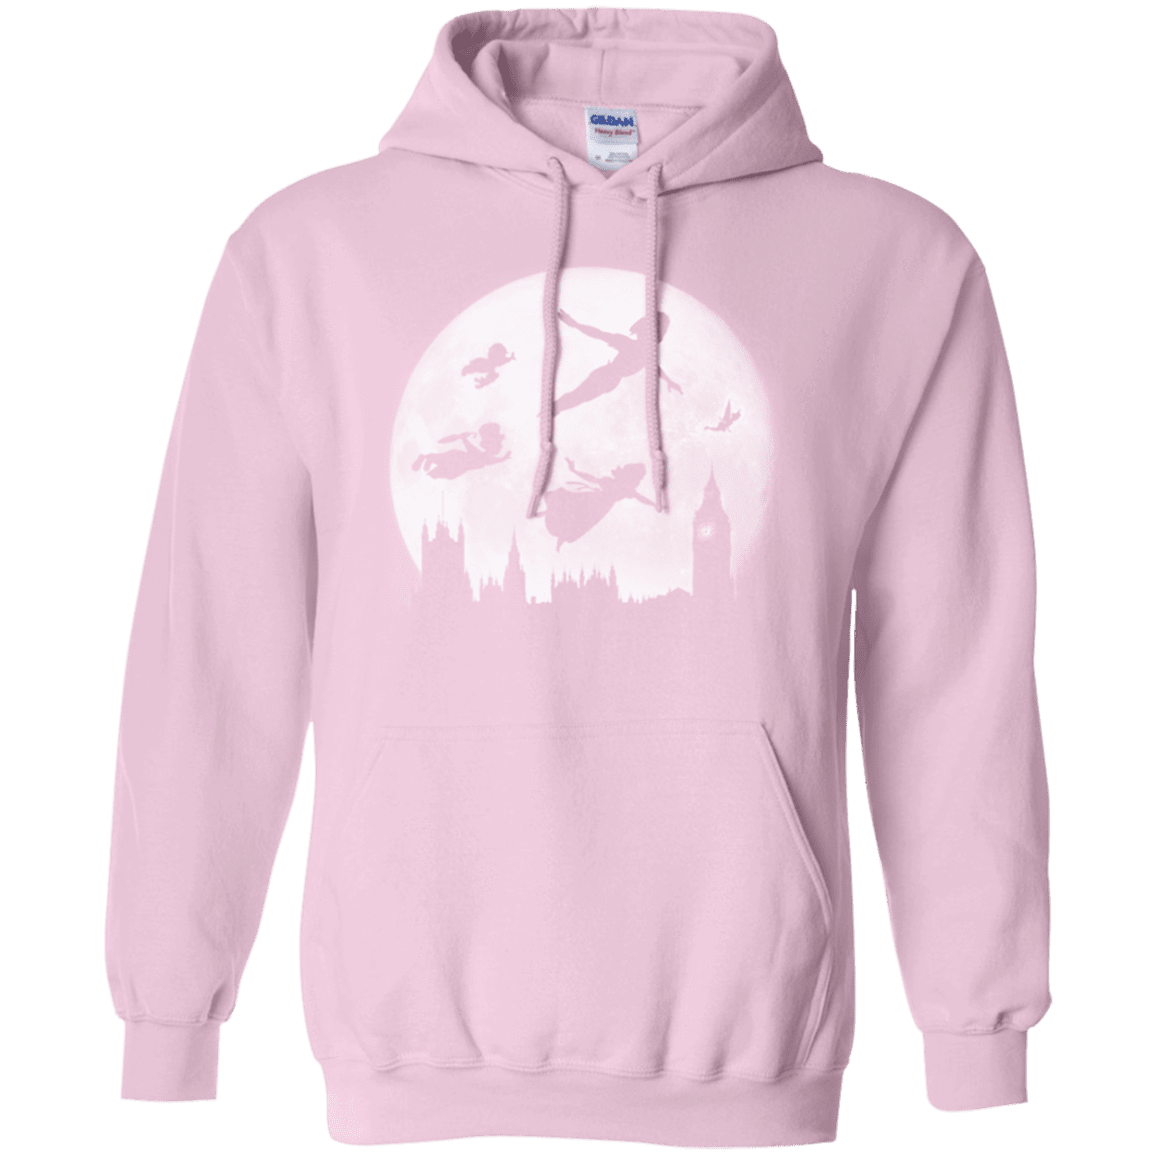 Sweatshirts Light Pink / Small Full Moon over London Pullover Hoodie